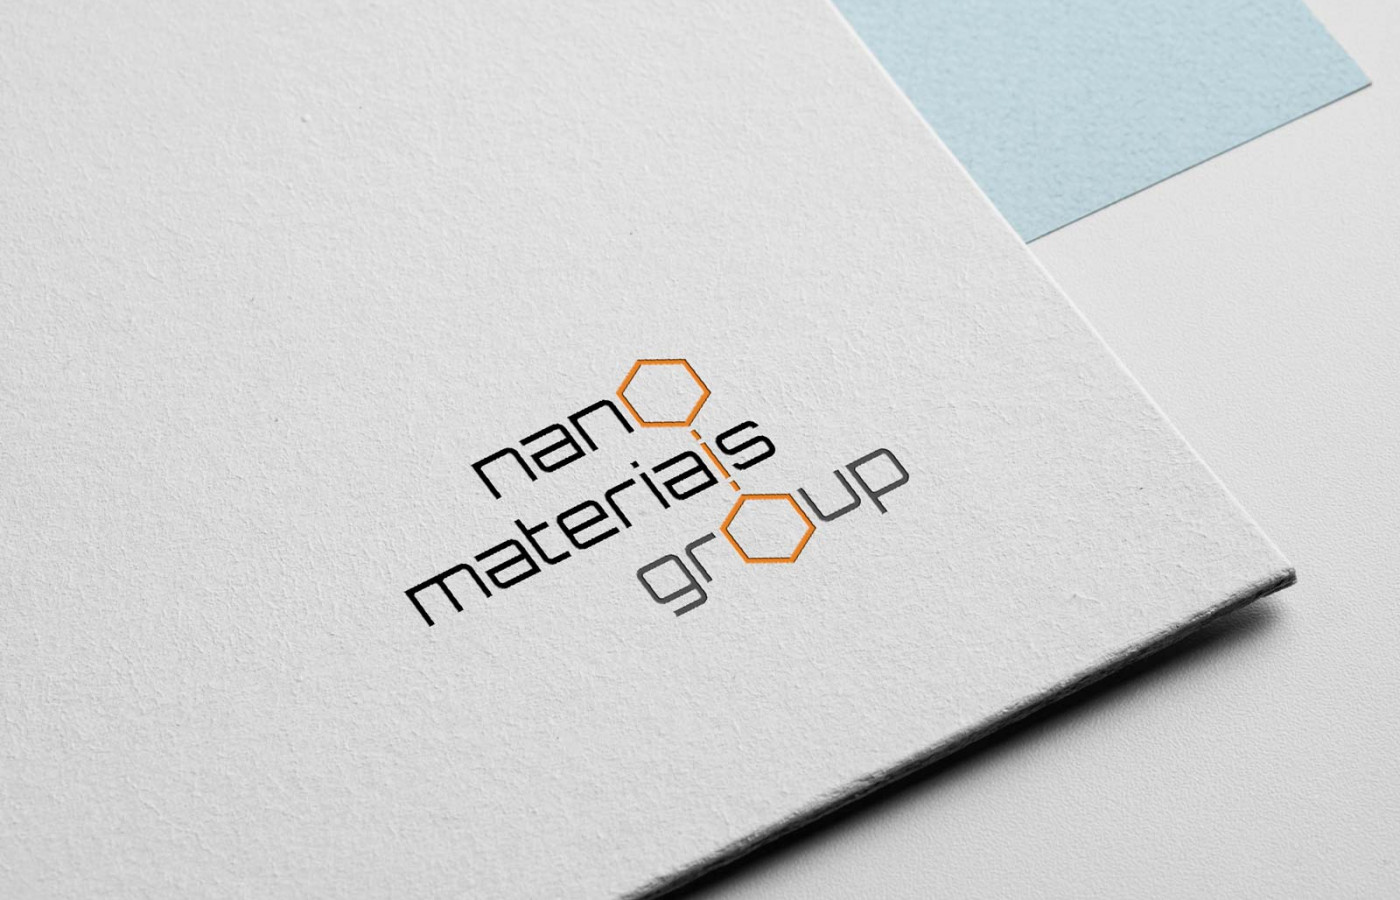 New logo of the Nanomaterials Group